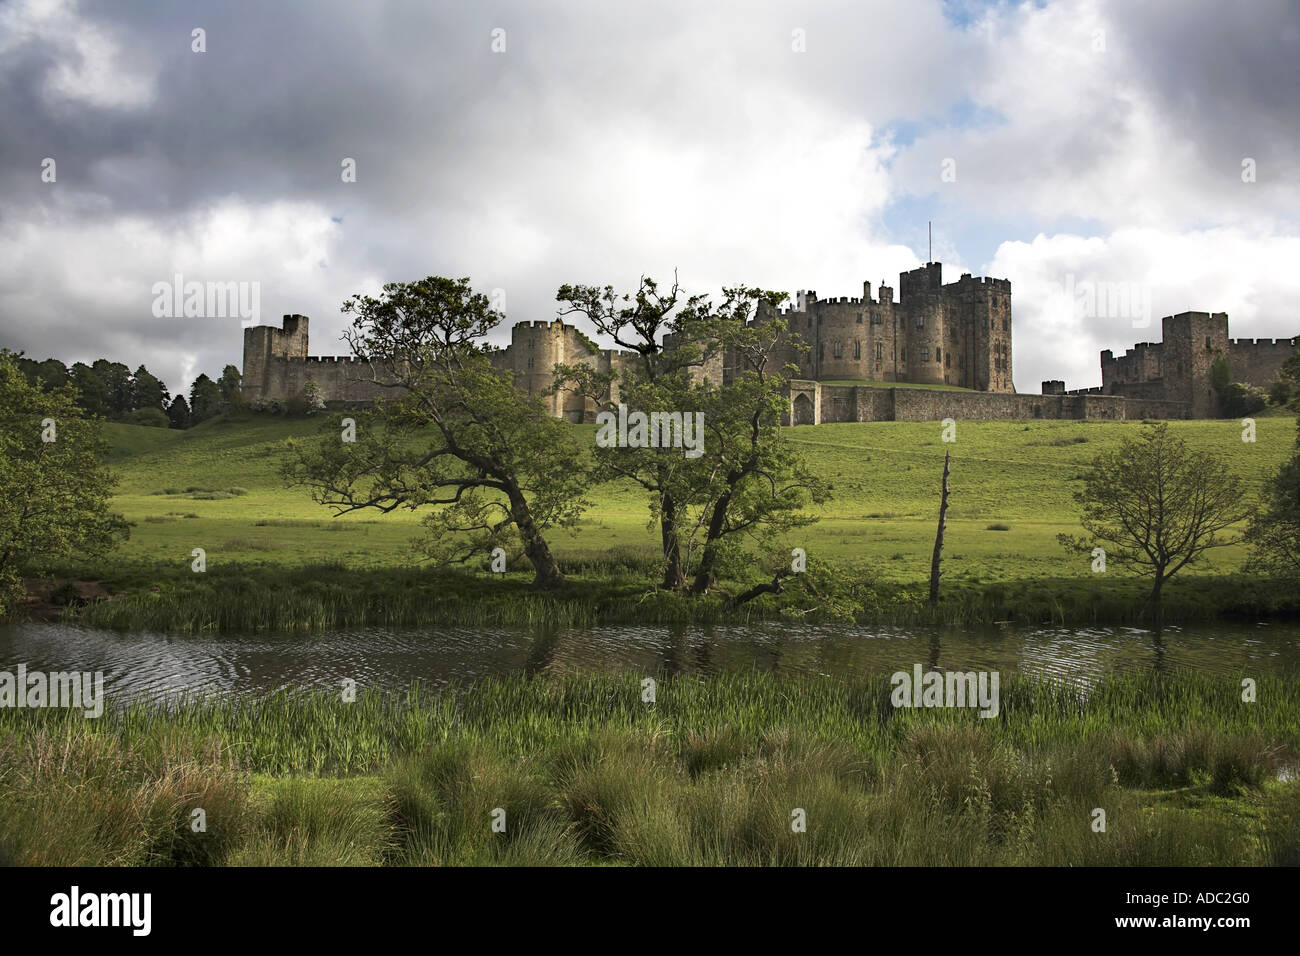 Alnwick Castle Northumberland England Ancestral Home of the Percy family Stock Photo